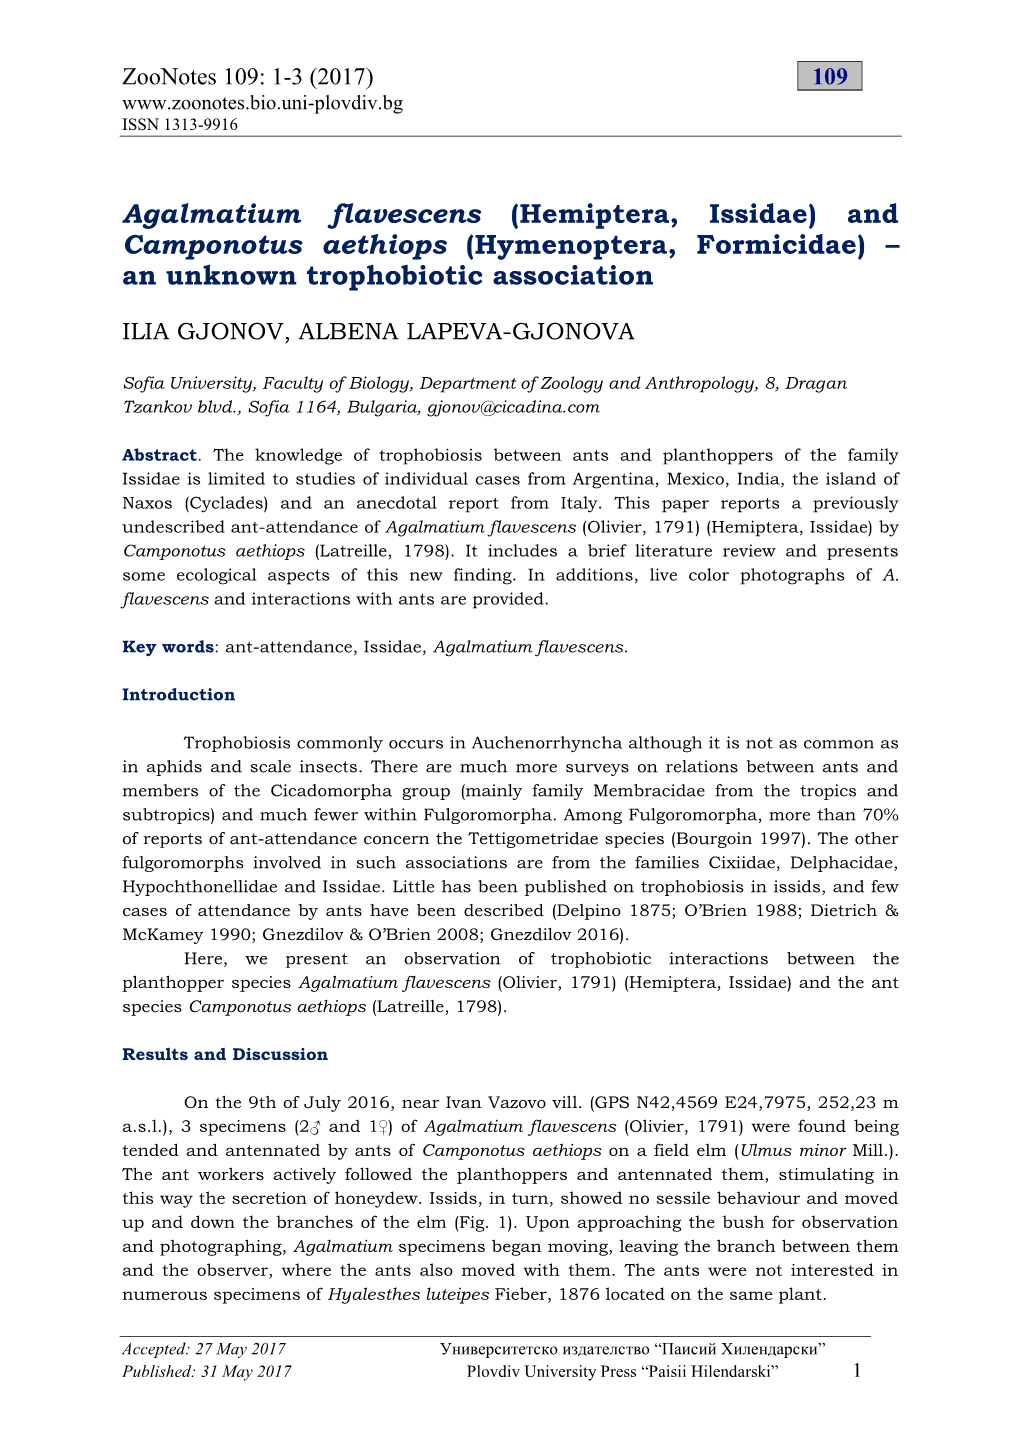 Agalmatium Flavescens (Hemiptera, Issidae) and Camponotus Aethiops (Hymenoptera, Formicidae) – an Unknown Trophobiotic Association